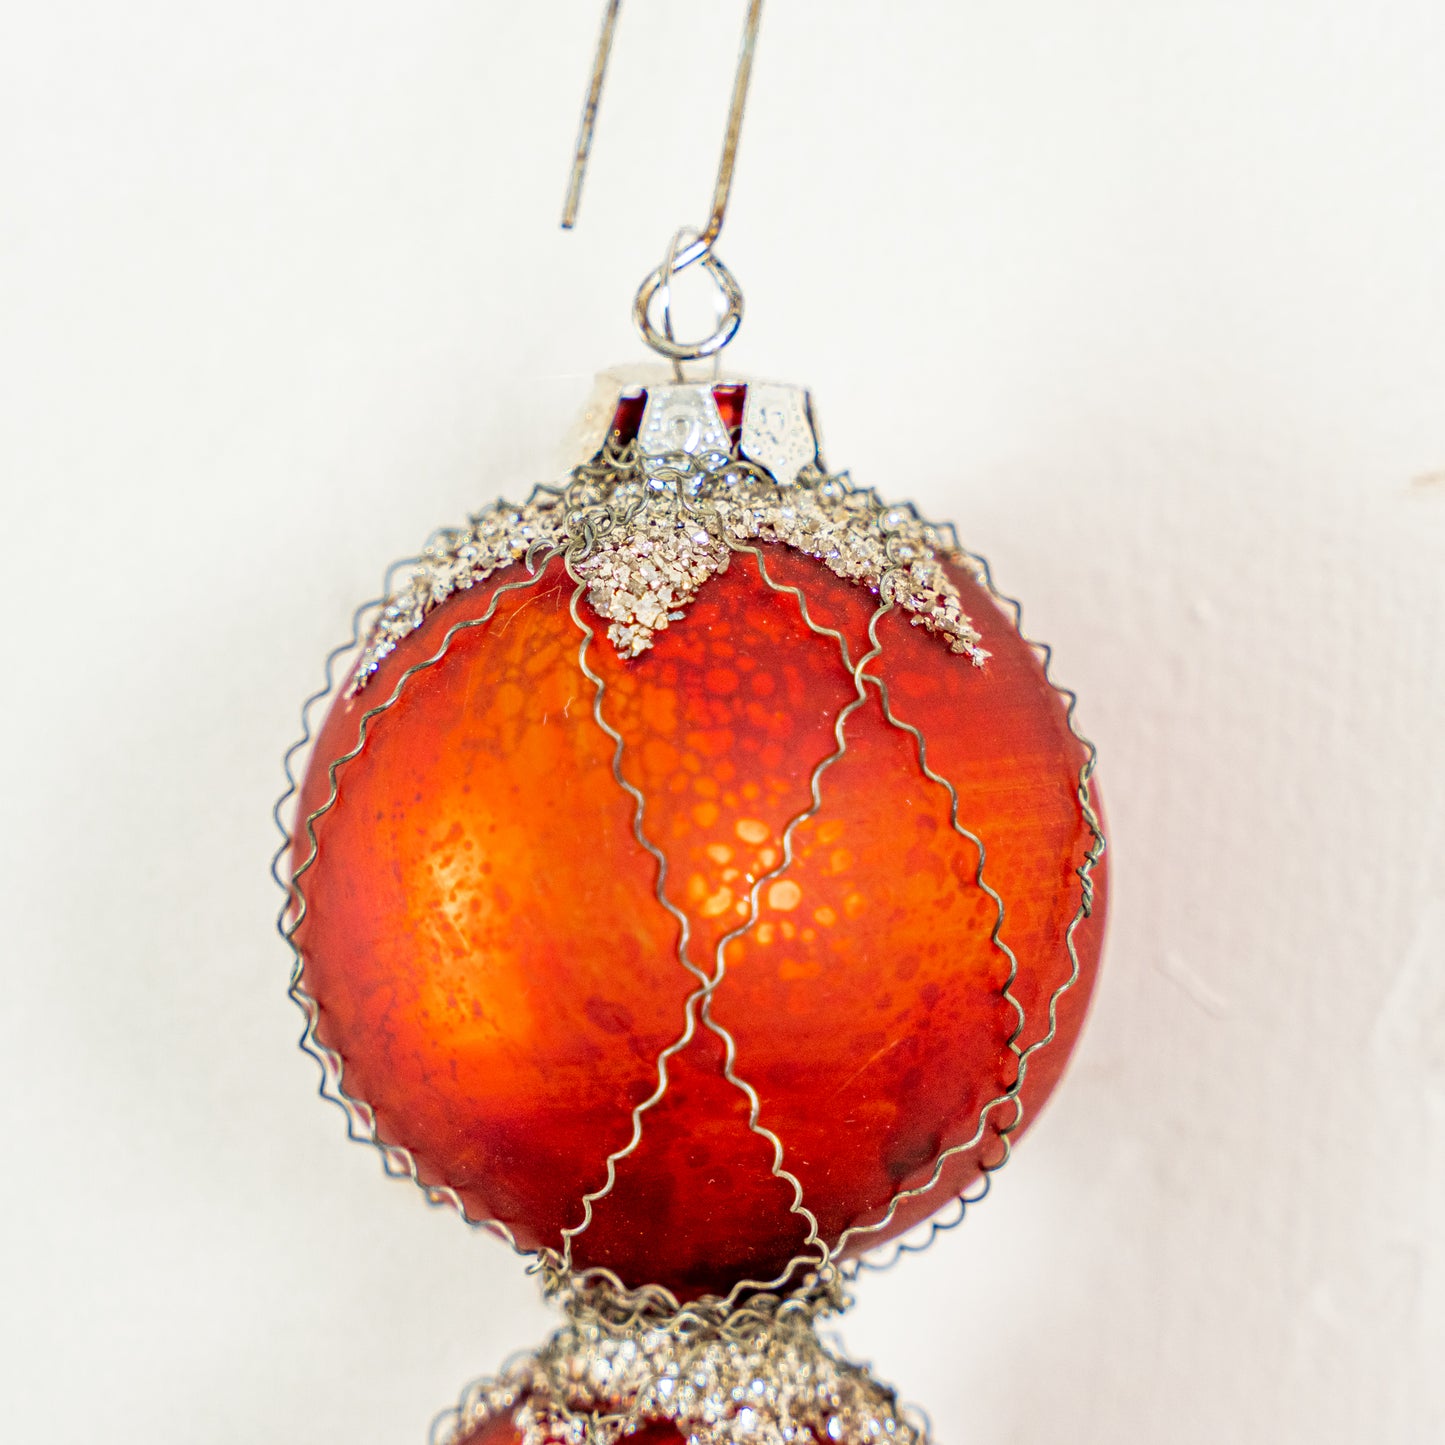 Red Glass Ornament with Glitter